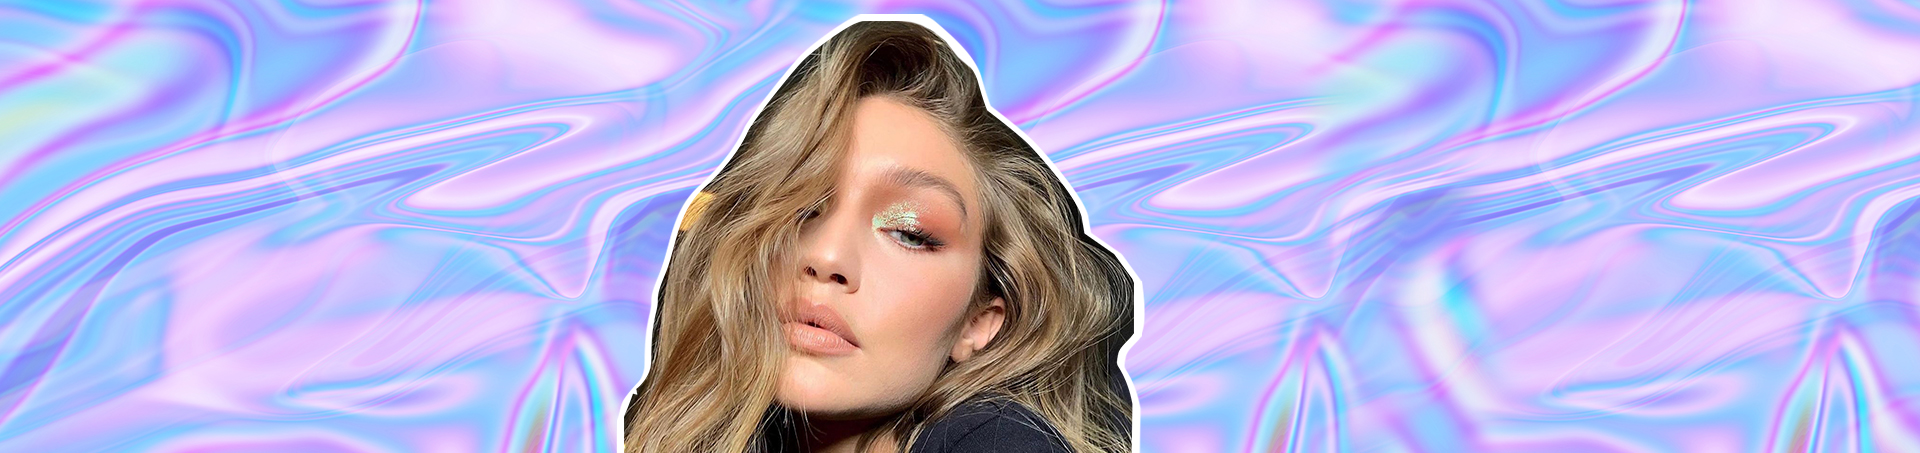 Holographic Makeup Trend